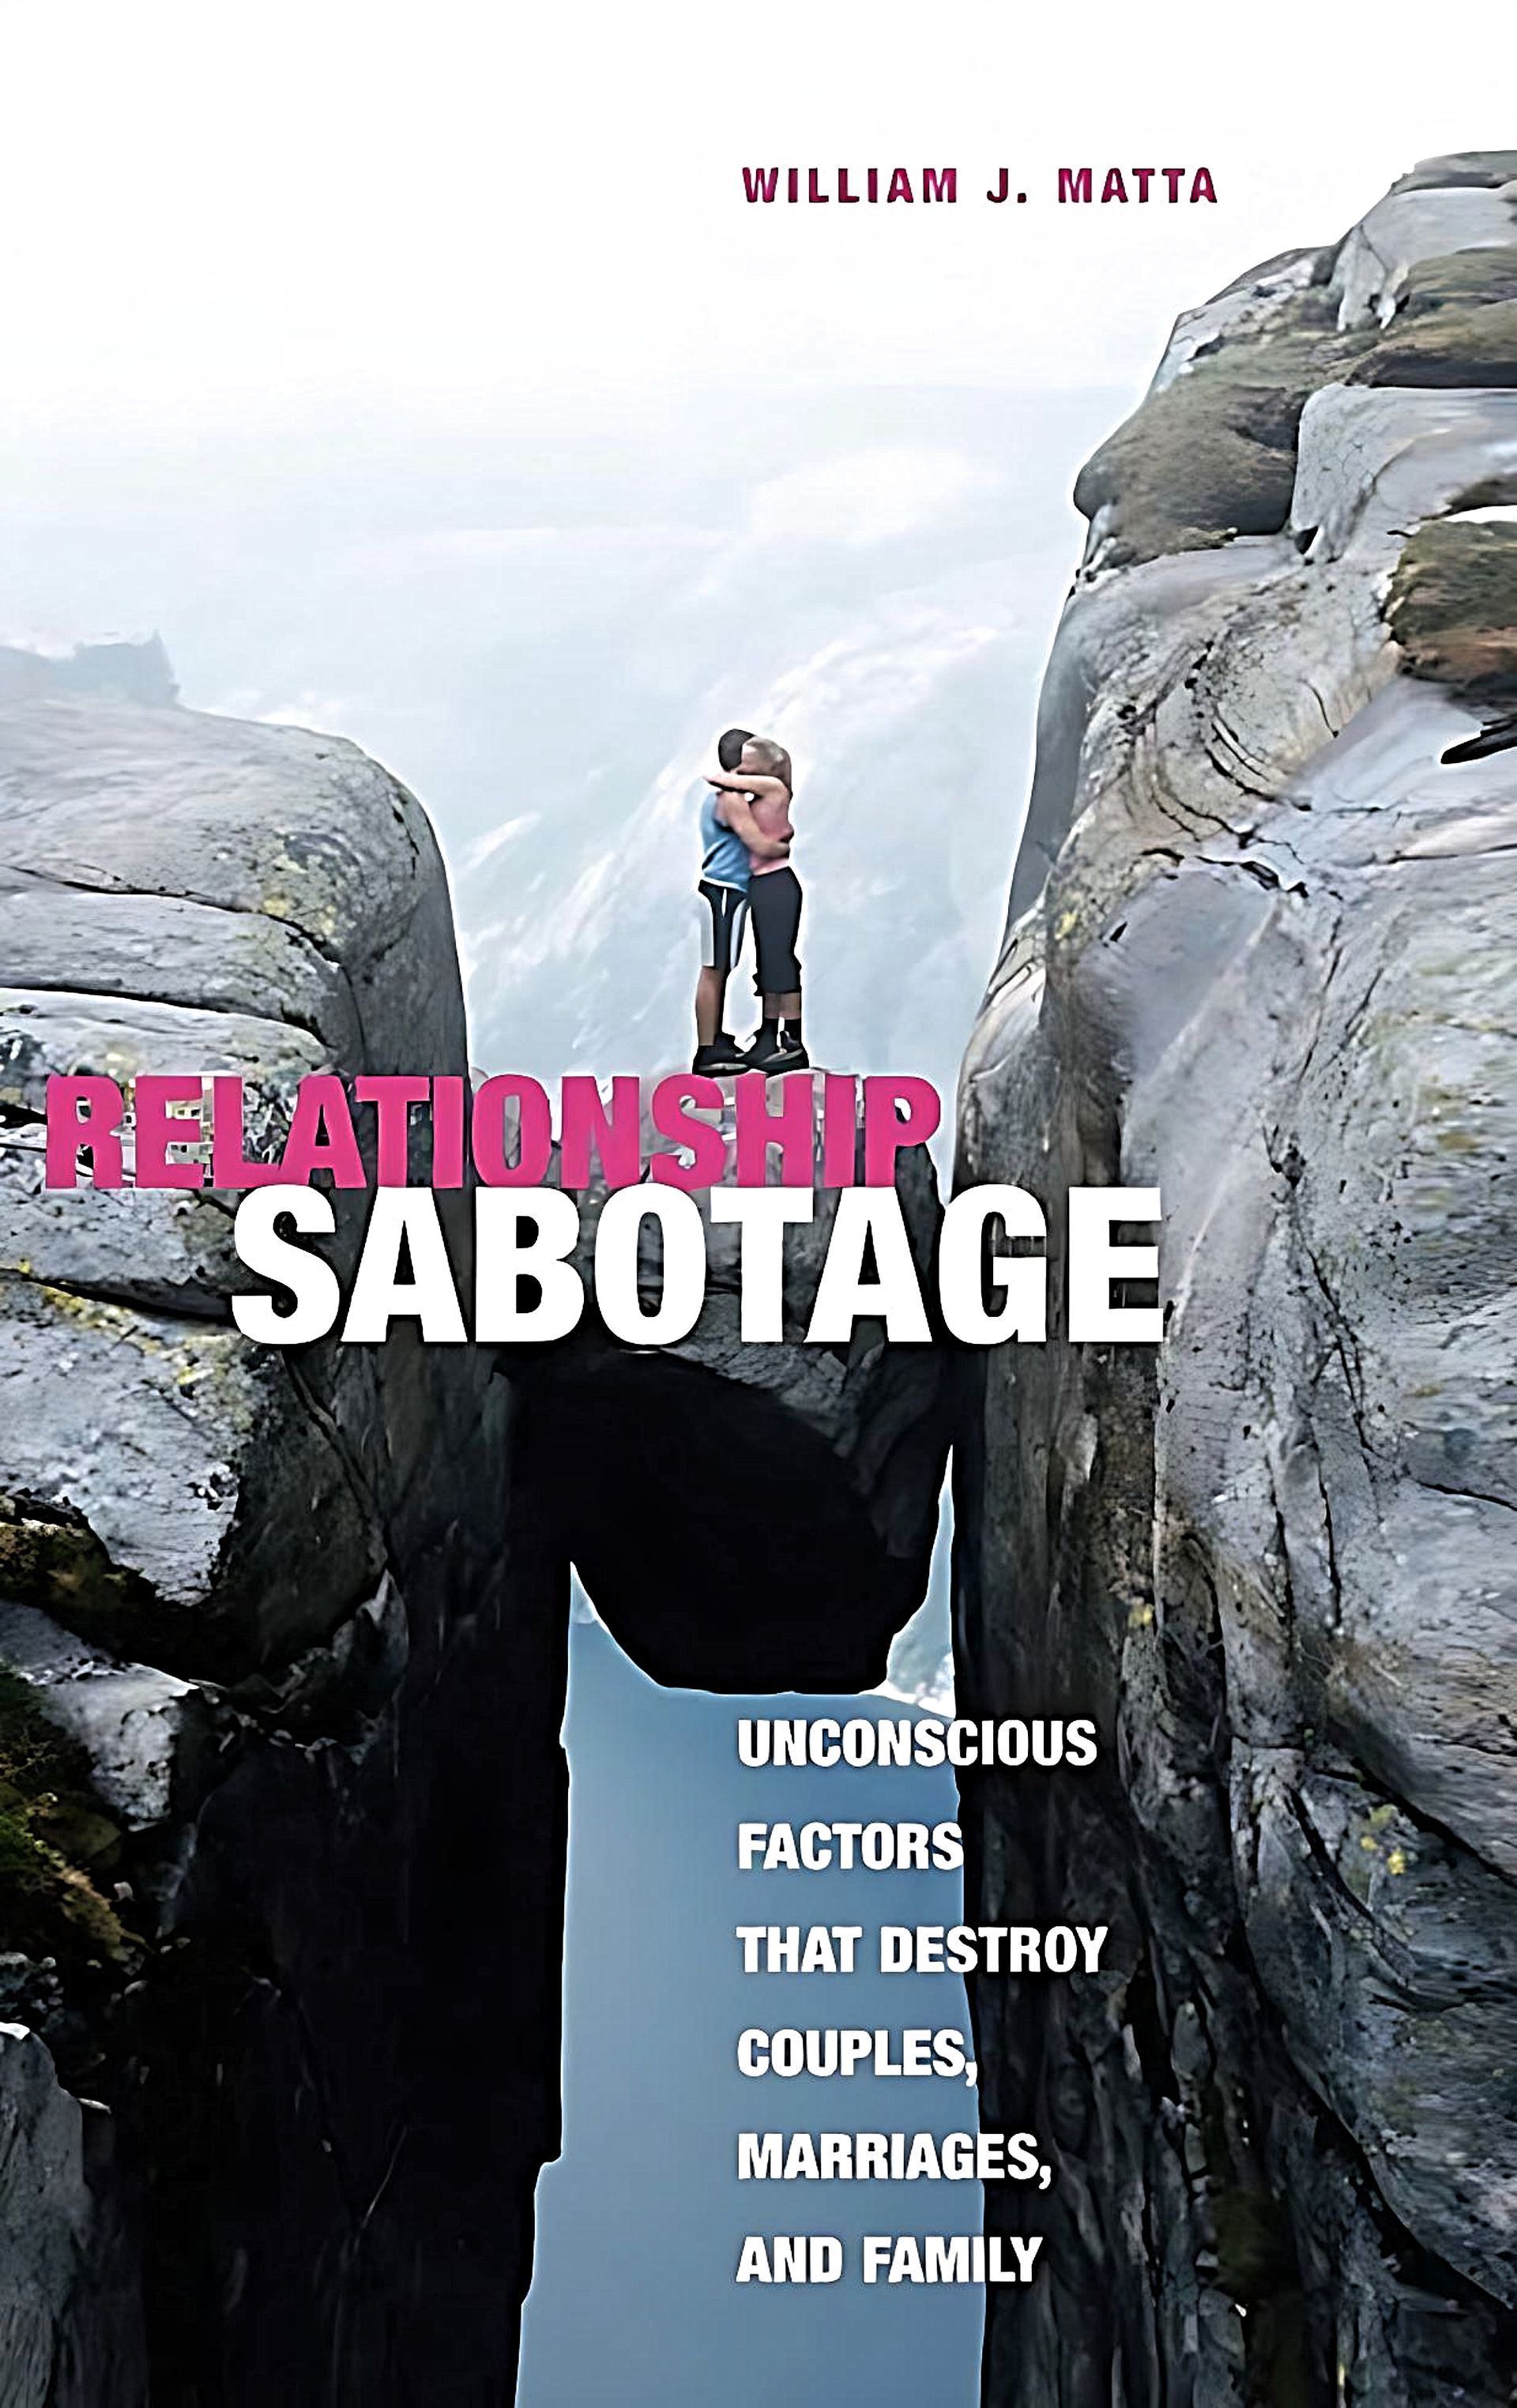 relationship sabotage book cover- publications page